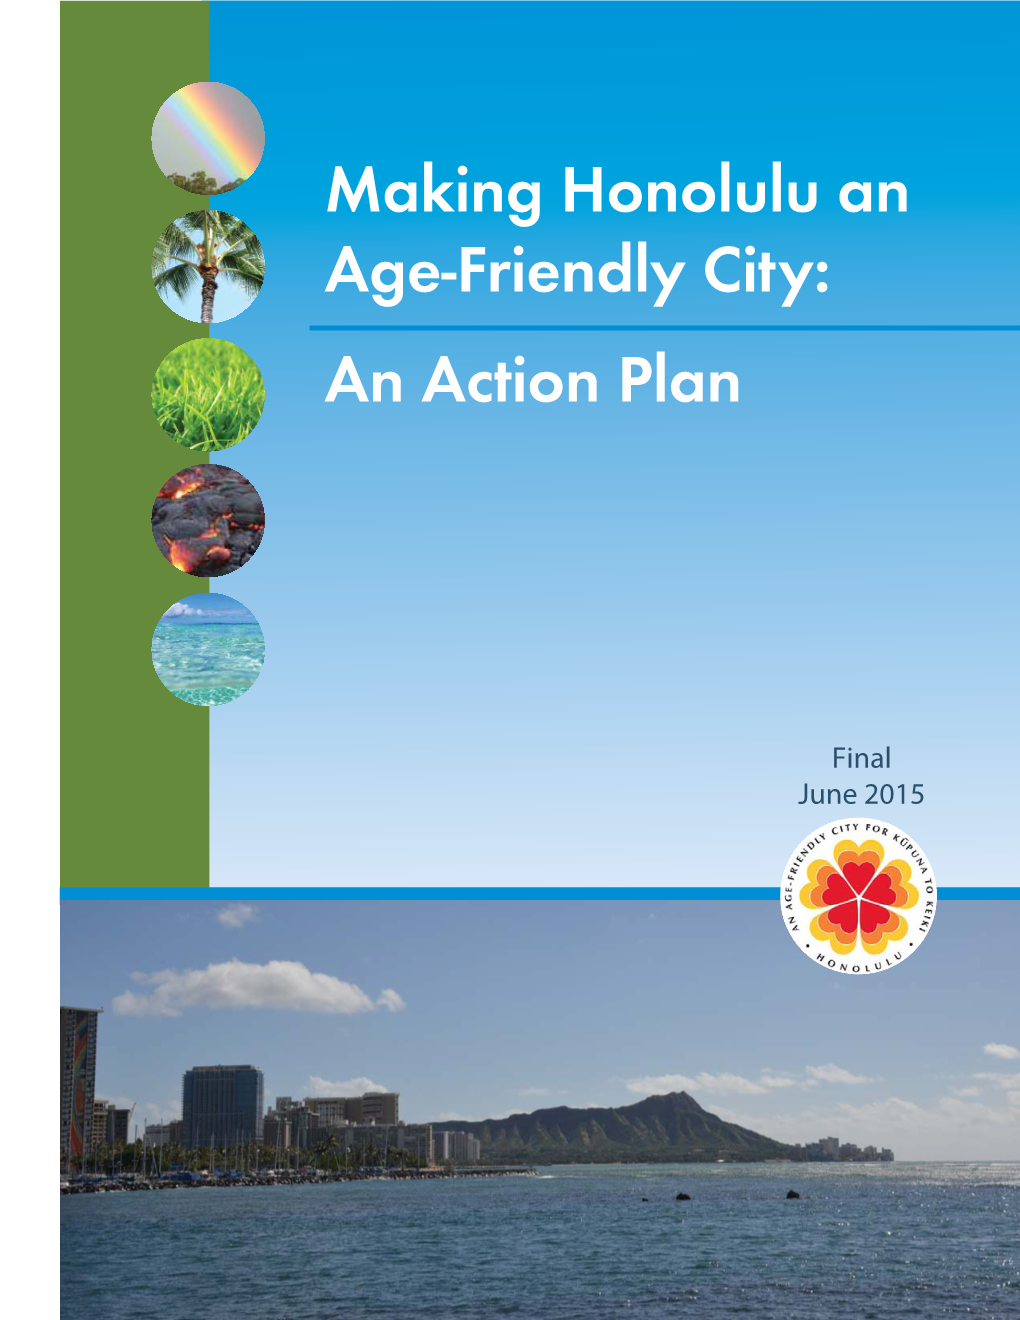 Making Honolulu an Age-Friendly City: an Action Plan